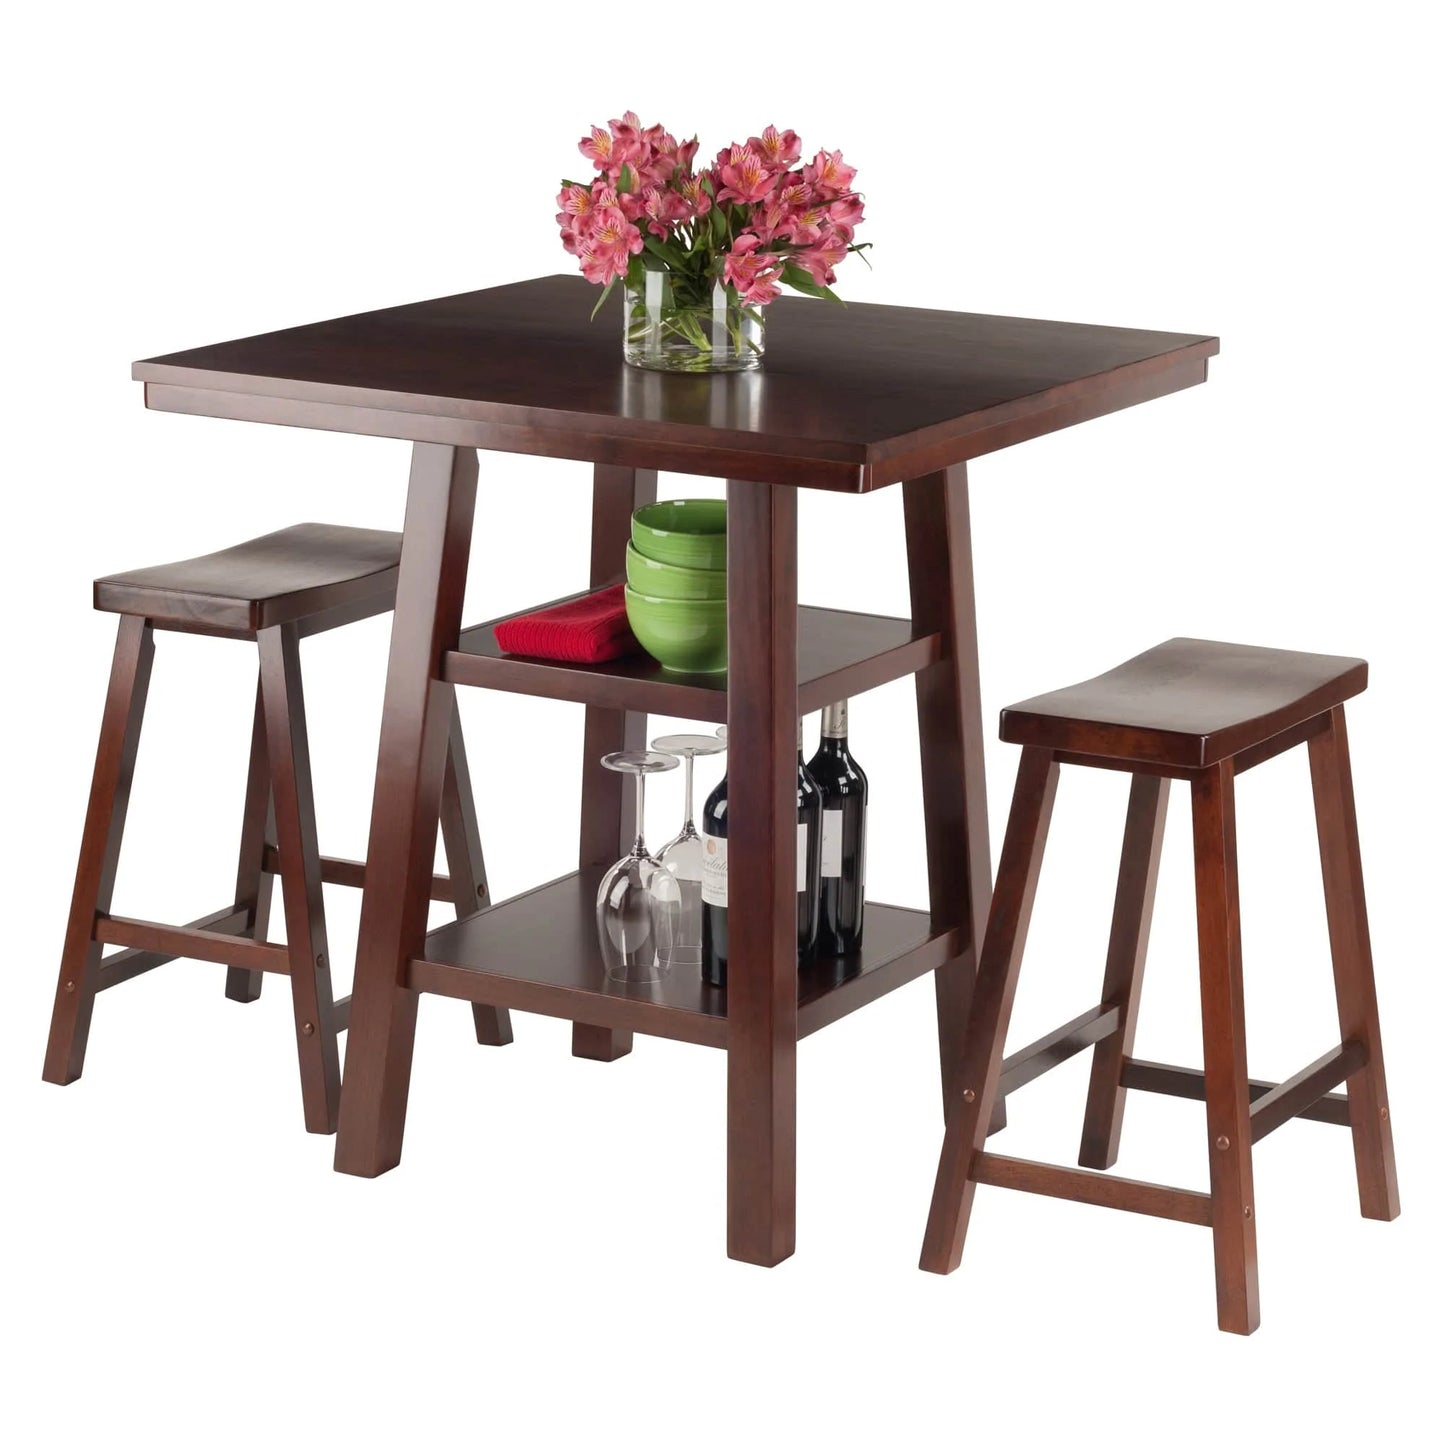 WINSOME Pub Table Set Orlando 3-Pc High Table with Saddle Seat Counter Stools, Walnut